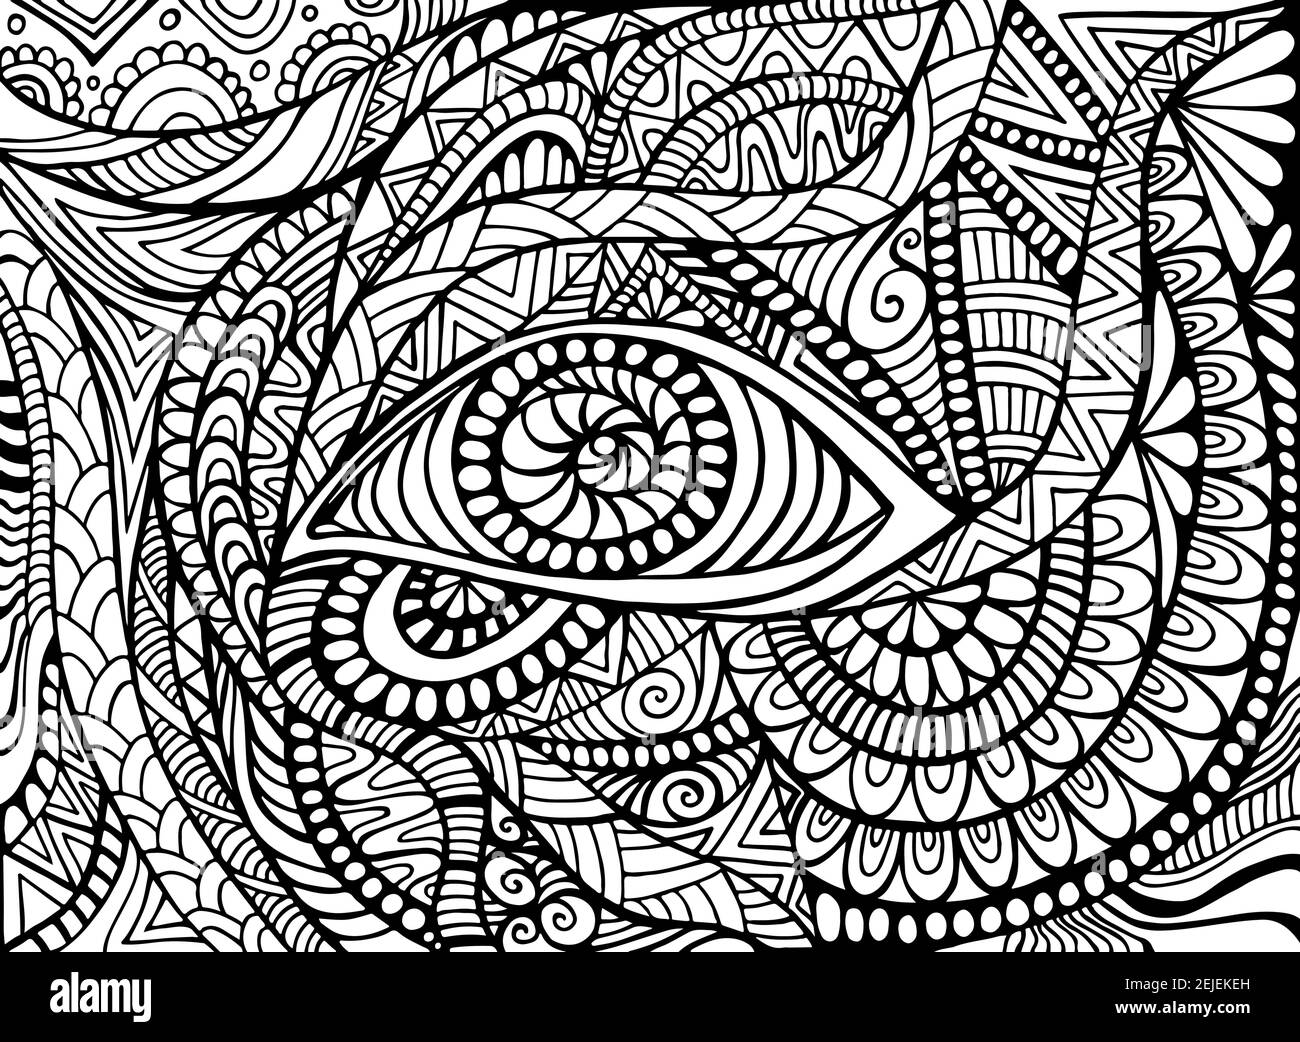 Shamanic Eye psychedelic trippy Coloring page for adult with ...